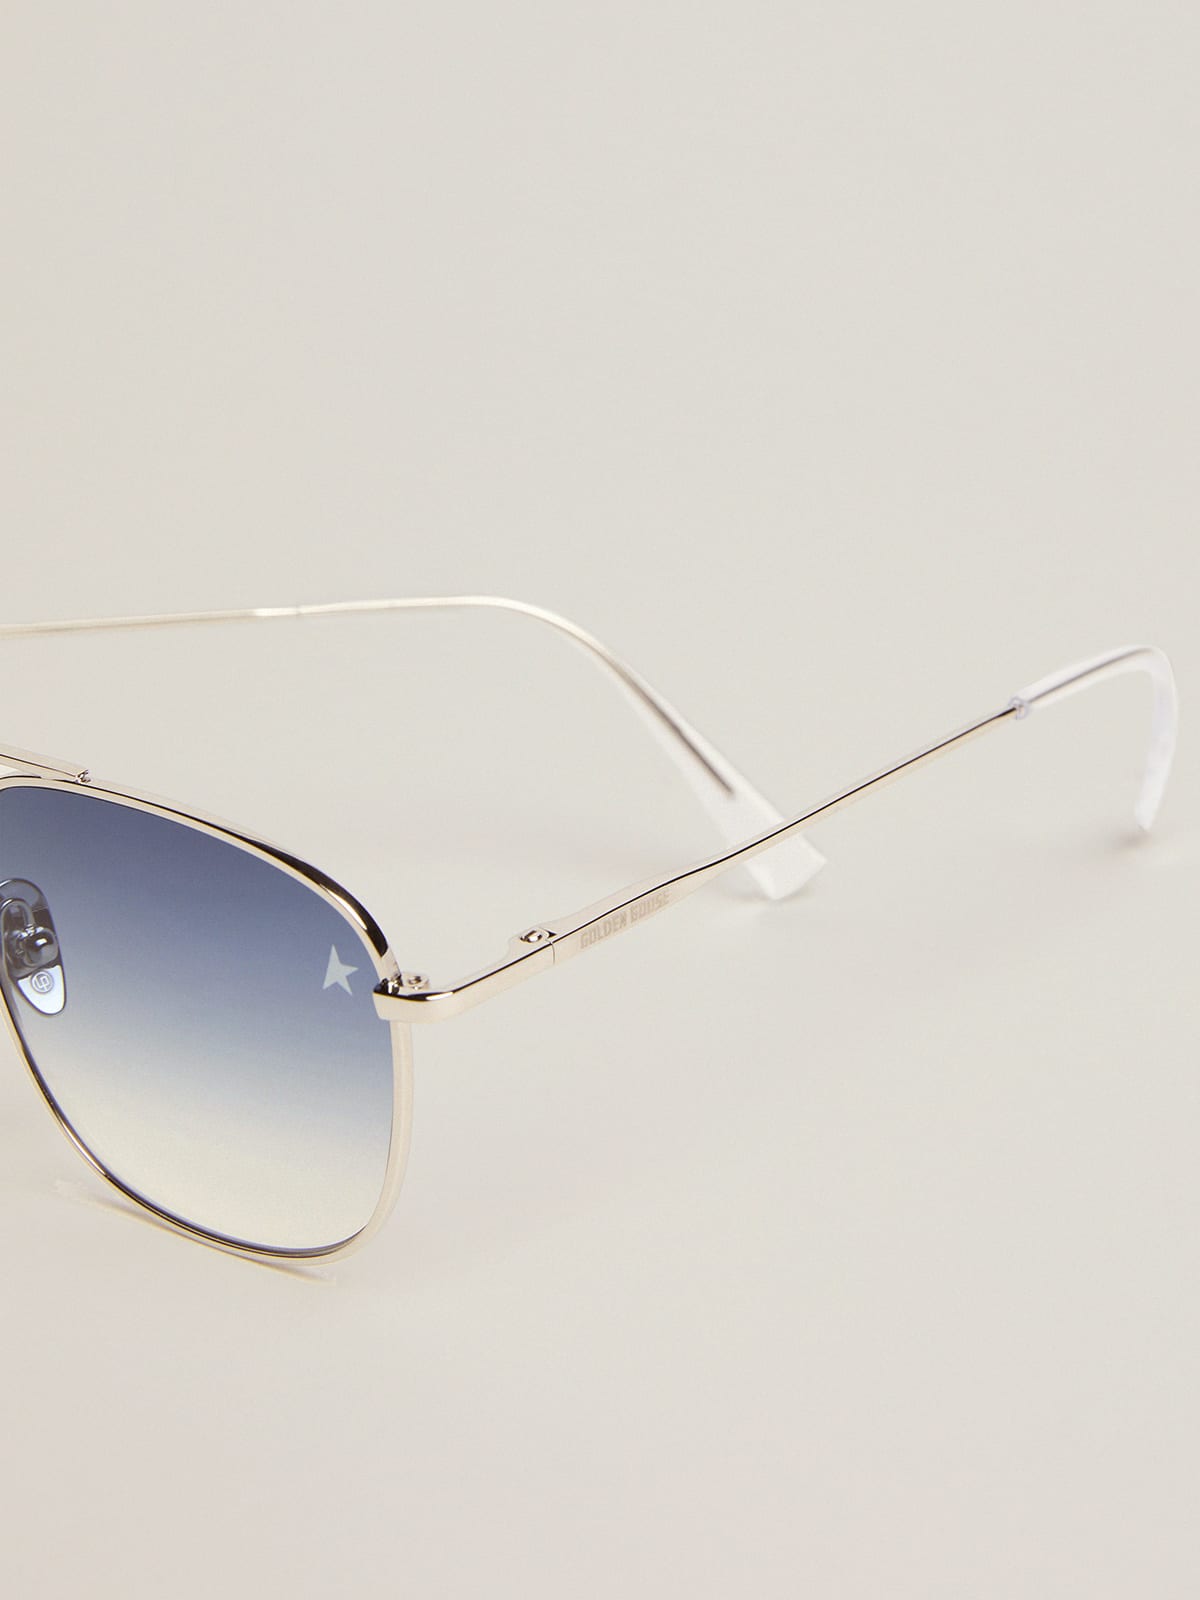 Golden Goose - Sunframe Roger, aviator style, with silver frame and gradient blue lenses in 